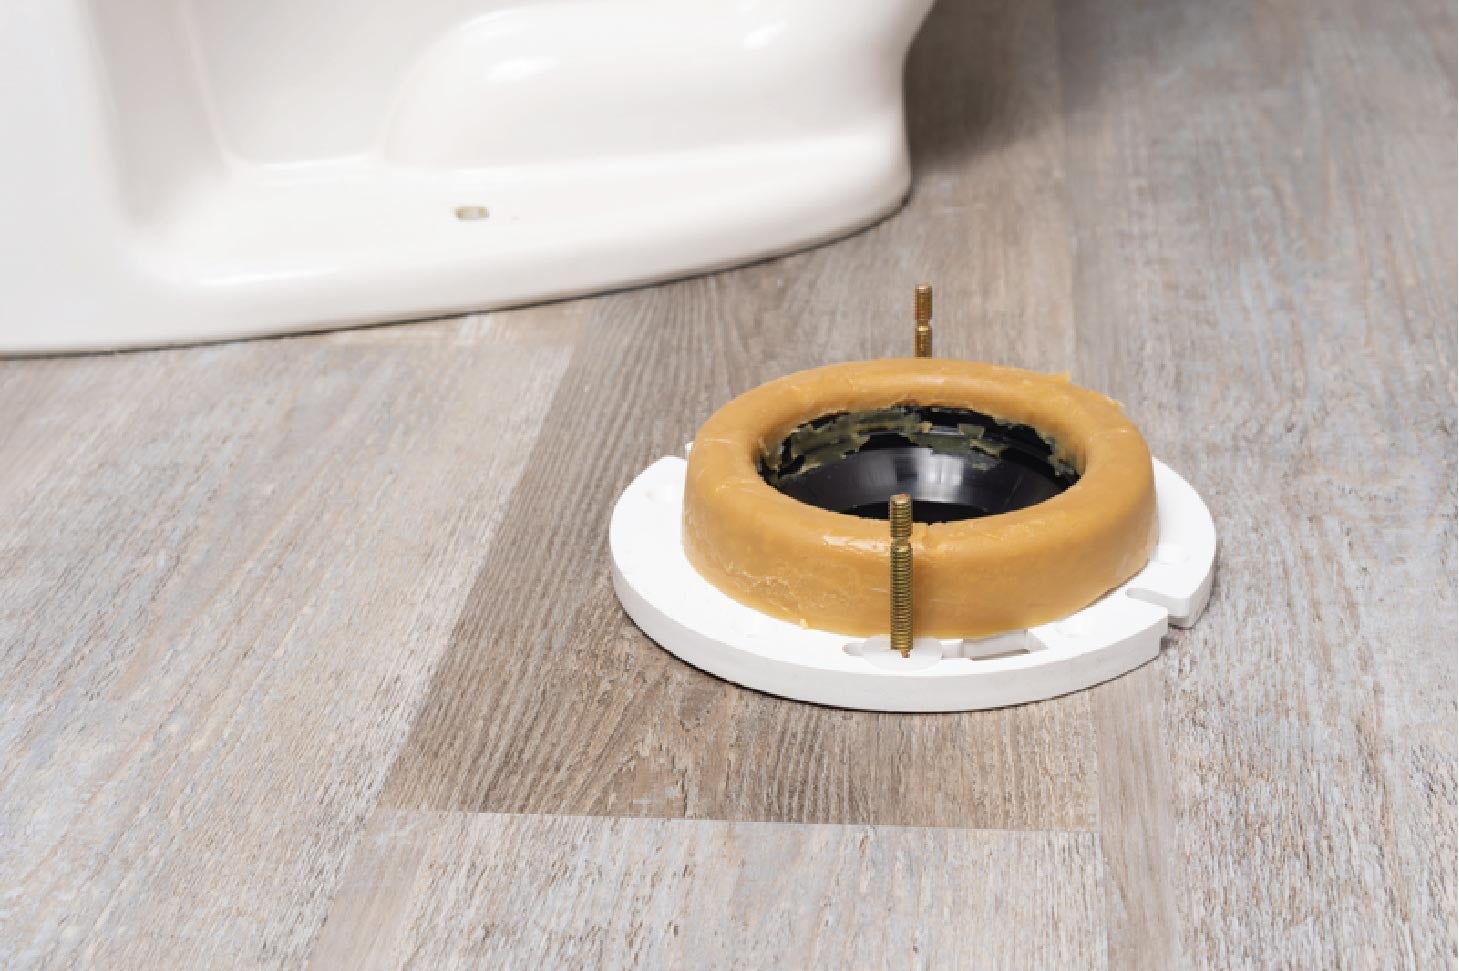 HERE'S HOW: Install a toilet in an area with no drain